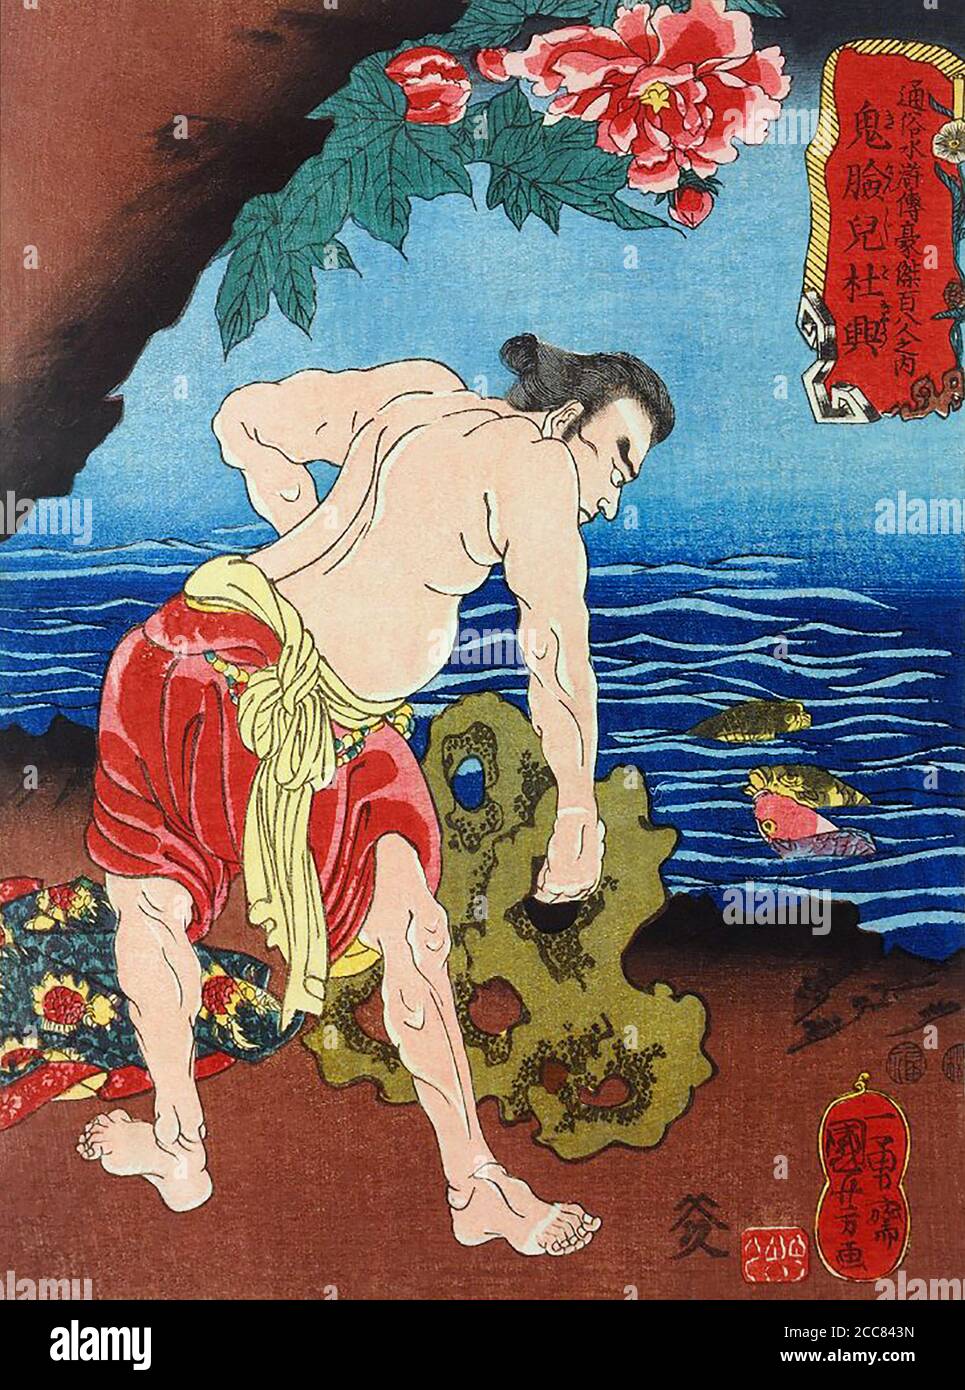 Japan: Demon Face Du Xing or Kikenji Tokyo, one of the 'One Hundred and Eight Heroes of the Water Margin', testing his strength against a rock in a cave by water, fish surfacing next to him. Woodblock print by Utagawa Kuniyoshi (1797-1863), 1827-1830. The Water Margin (known in Chinese as Shuihu Zhuan, sometimes abbreviated to Shuihu, known as Suikoden in Japanese, as well as Outlaws of the Marsh, Tale of the Marshes, All Men Are Brothers, Men of the Marshes, or The Marshes of Mount Liang in English, is a 14th century novel and one of the Four Great Classical Novels of Chinese literature. Attr Stock Photo